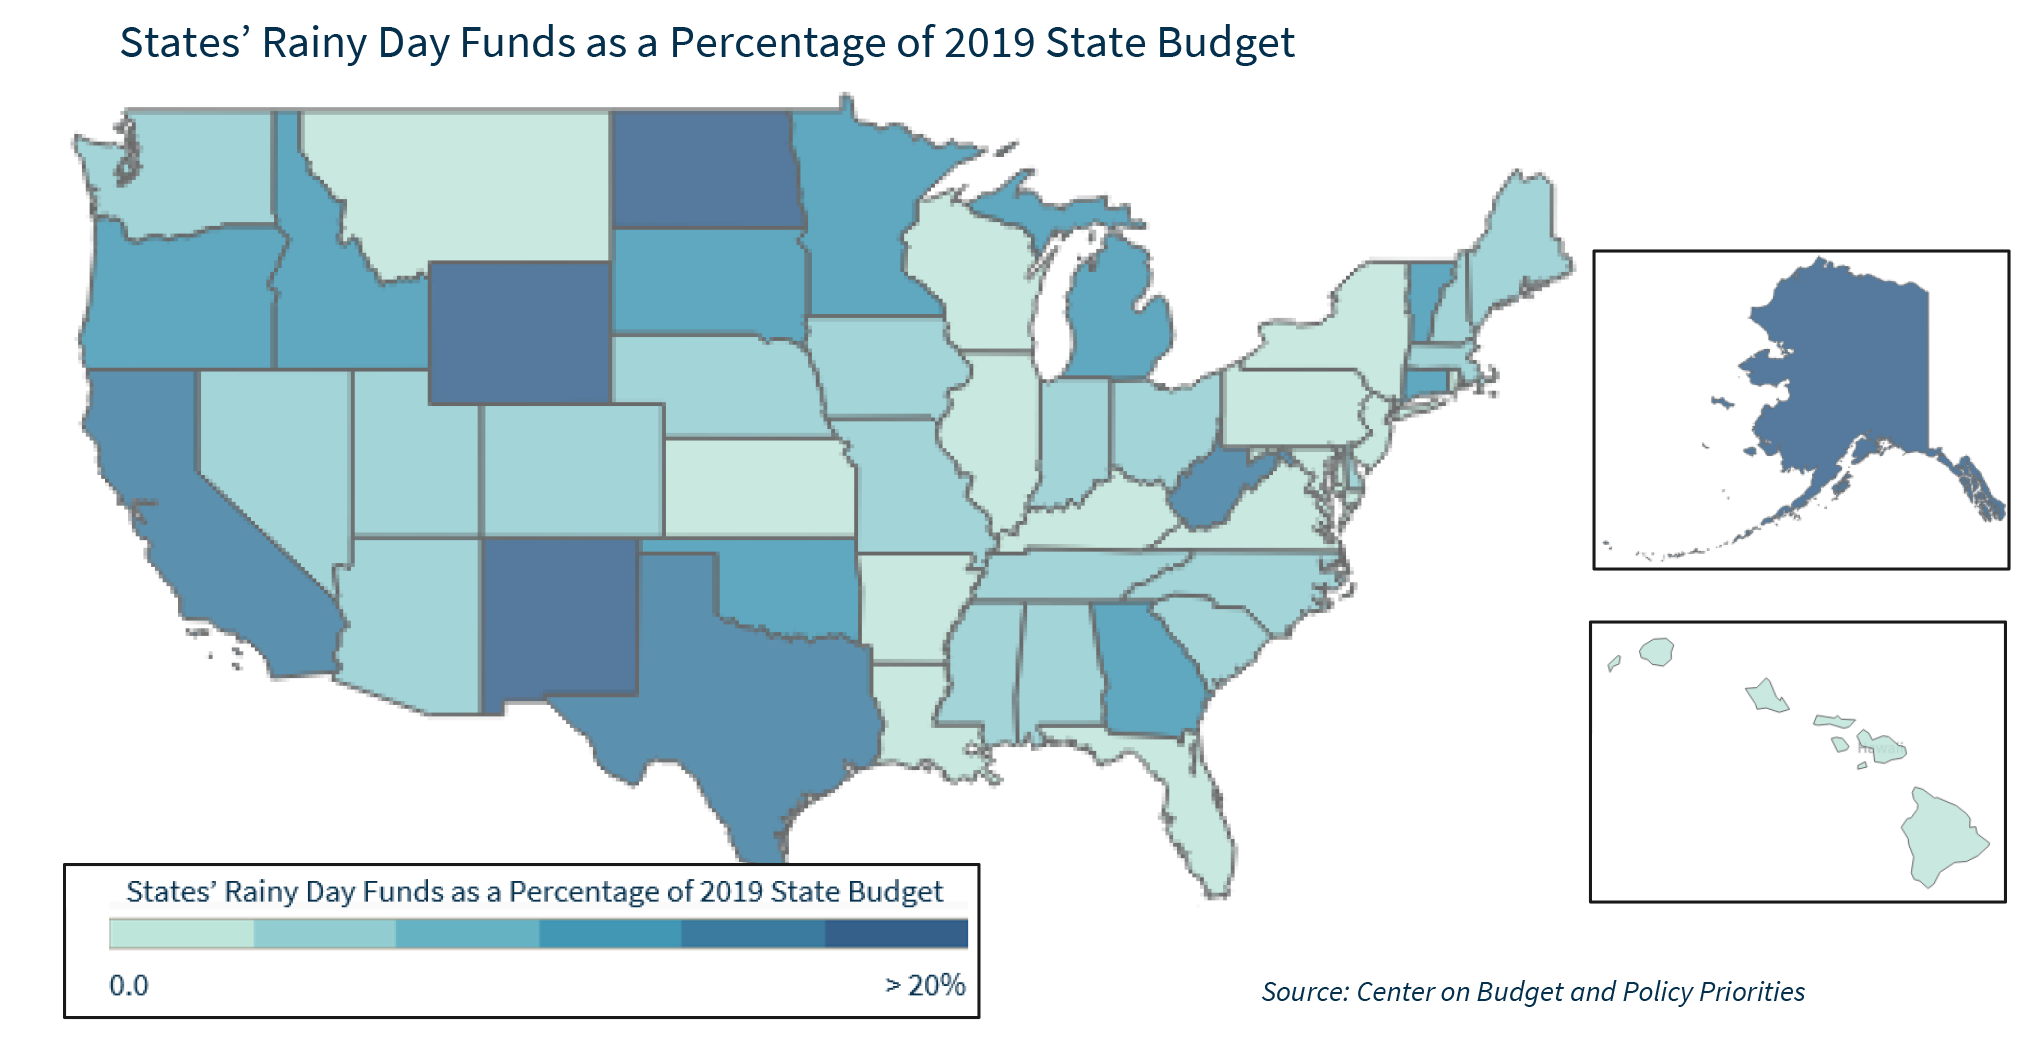 States’ Rainy Day Funds as a Percentage of 2019 State Budget